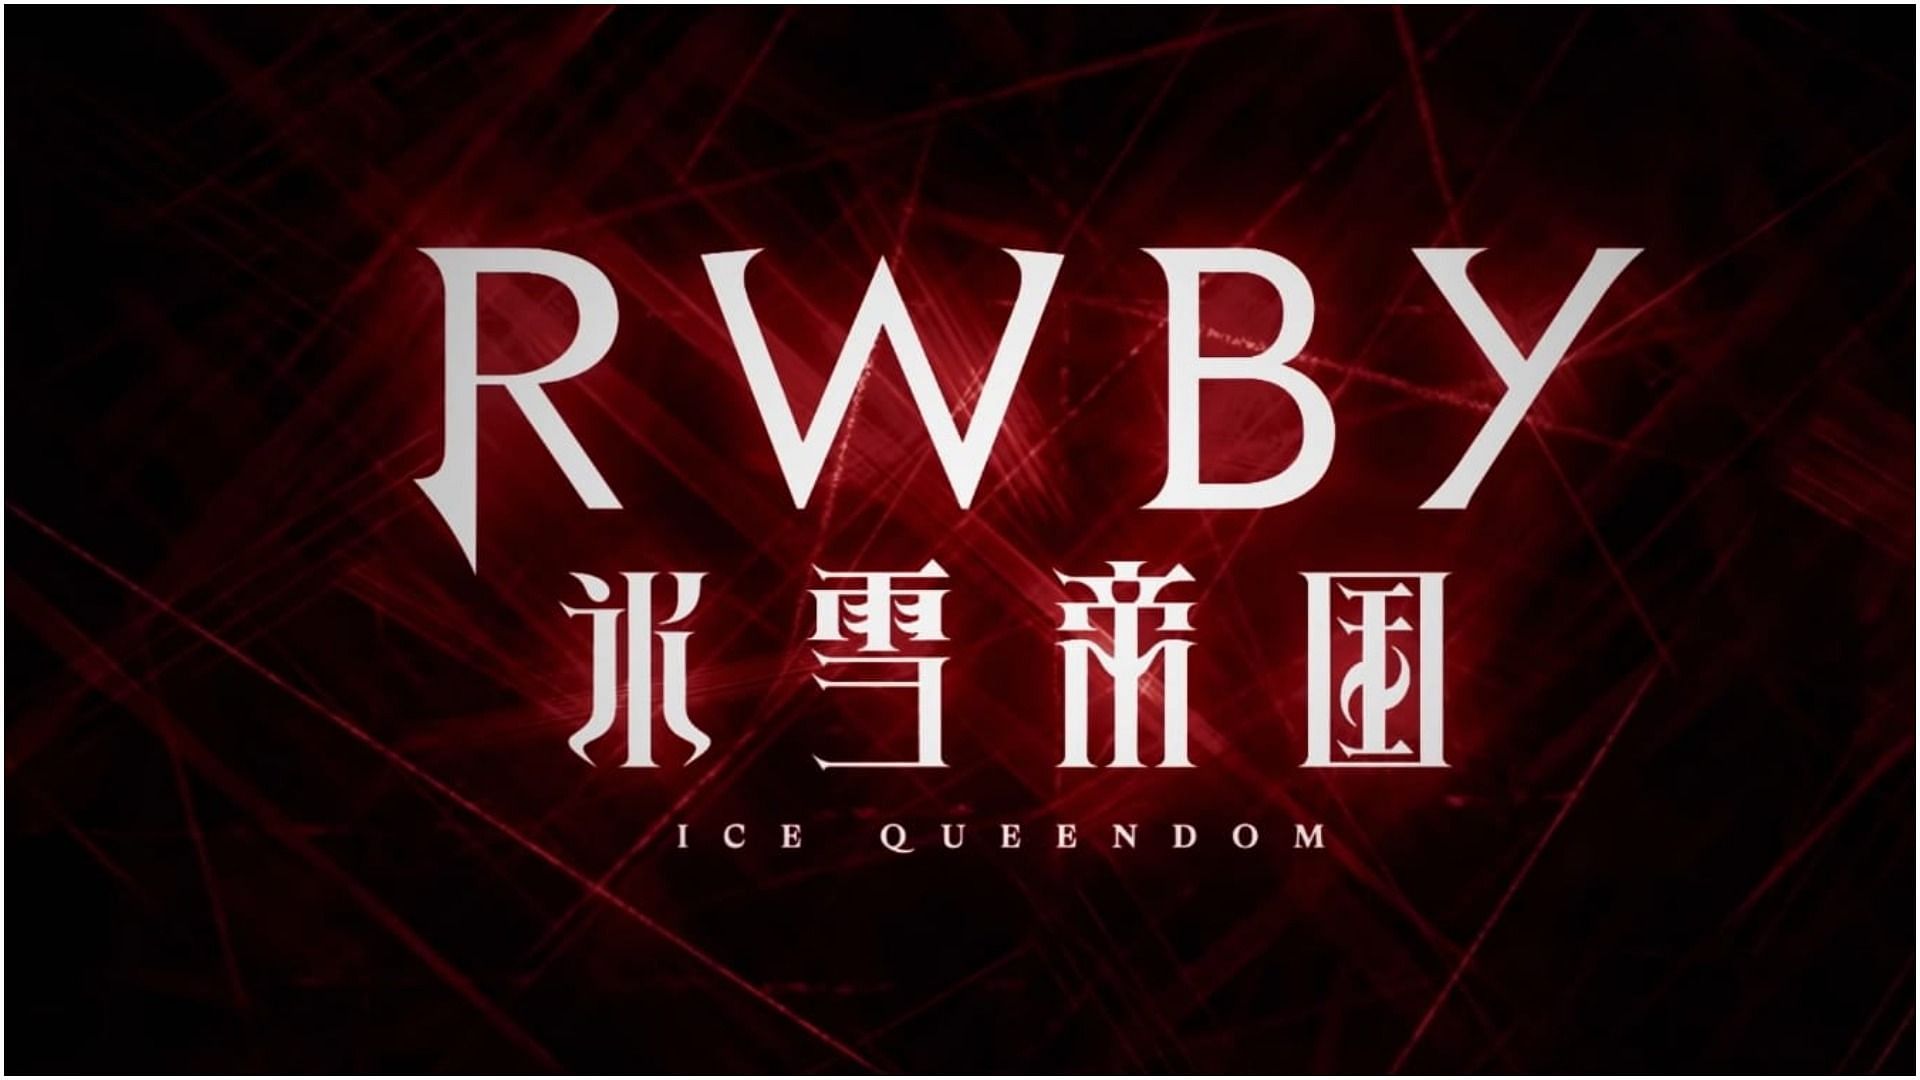 RWBY Ice Queendom  Official Anime Trailer  YouTube